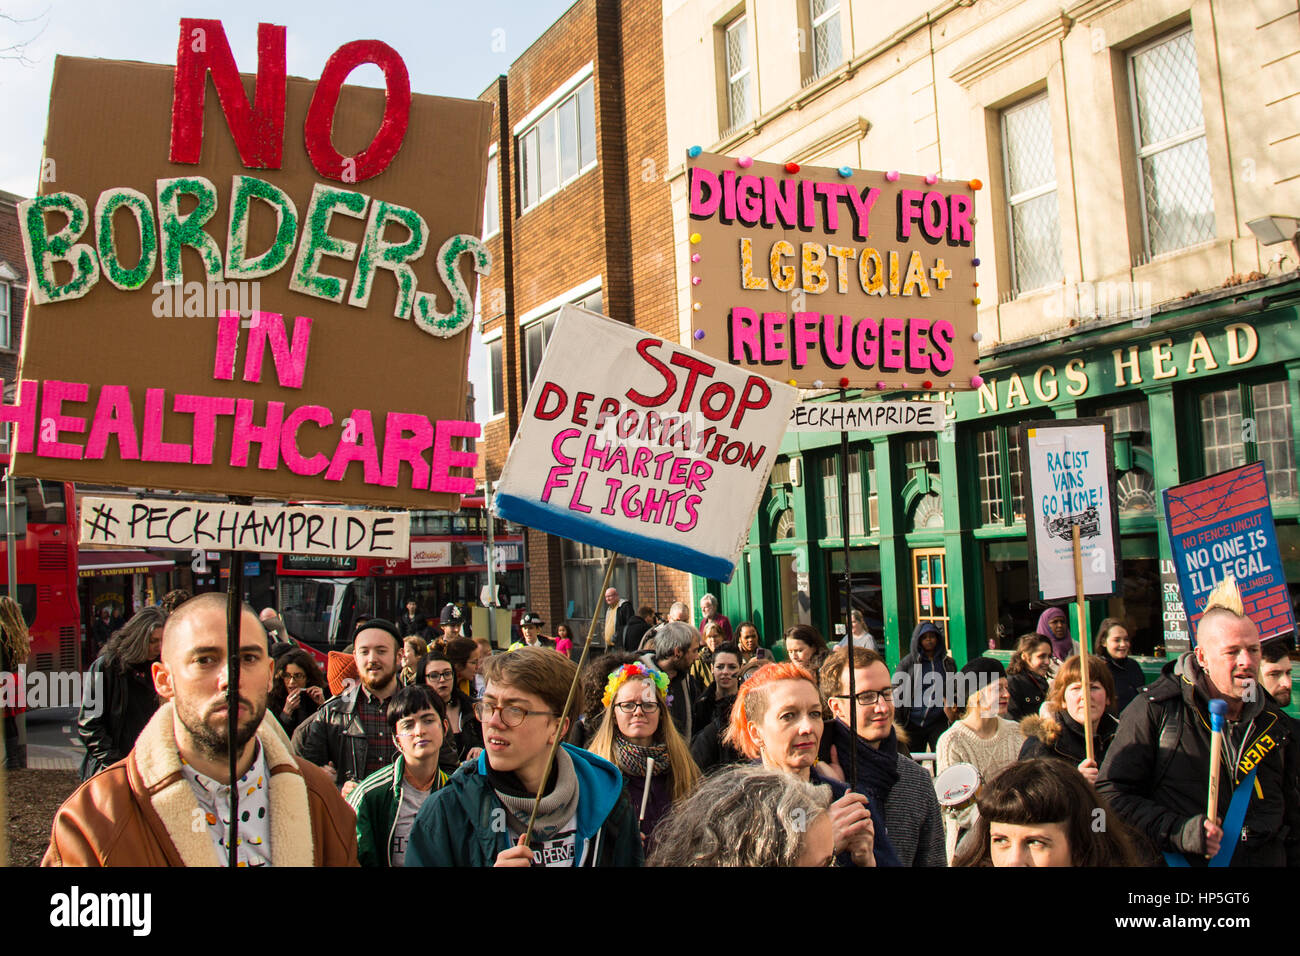 Peckham, London, UK. 18th Feb, 2017. Hundreds marched through Peckham, South London to protest against migrant deportation.David Rowe/Alamy Live News Credit: David Rowe/Alamy Live News Stock Photo